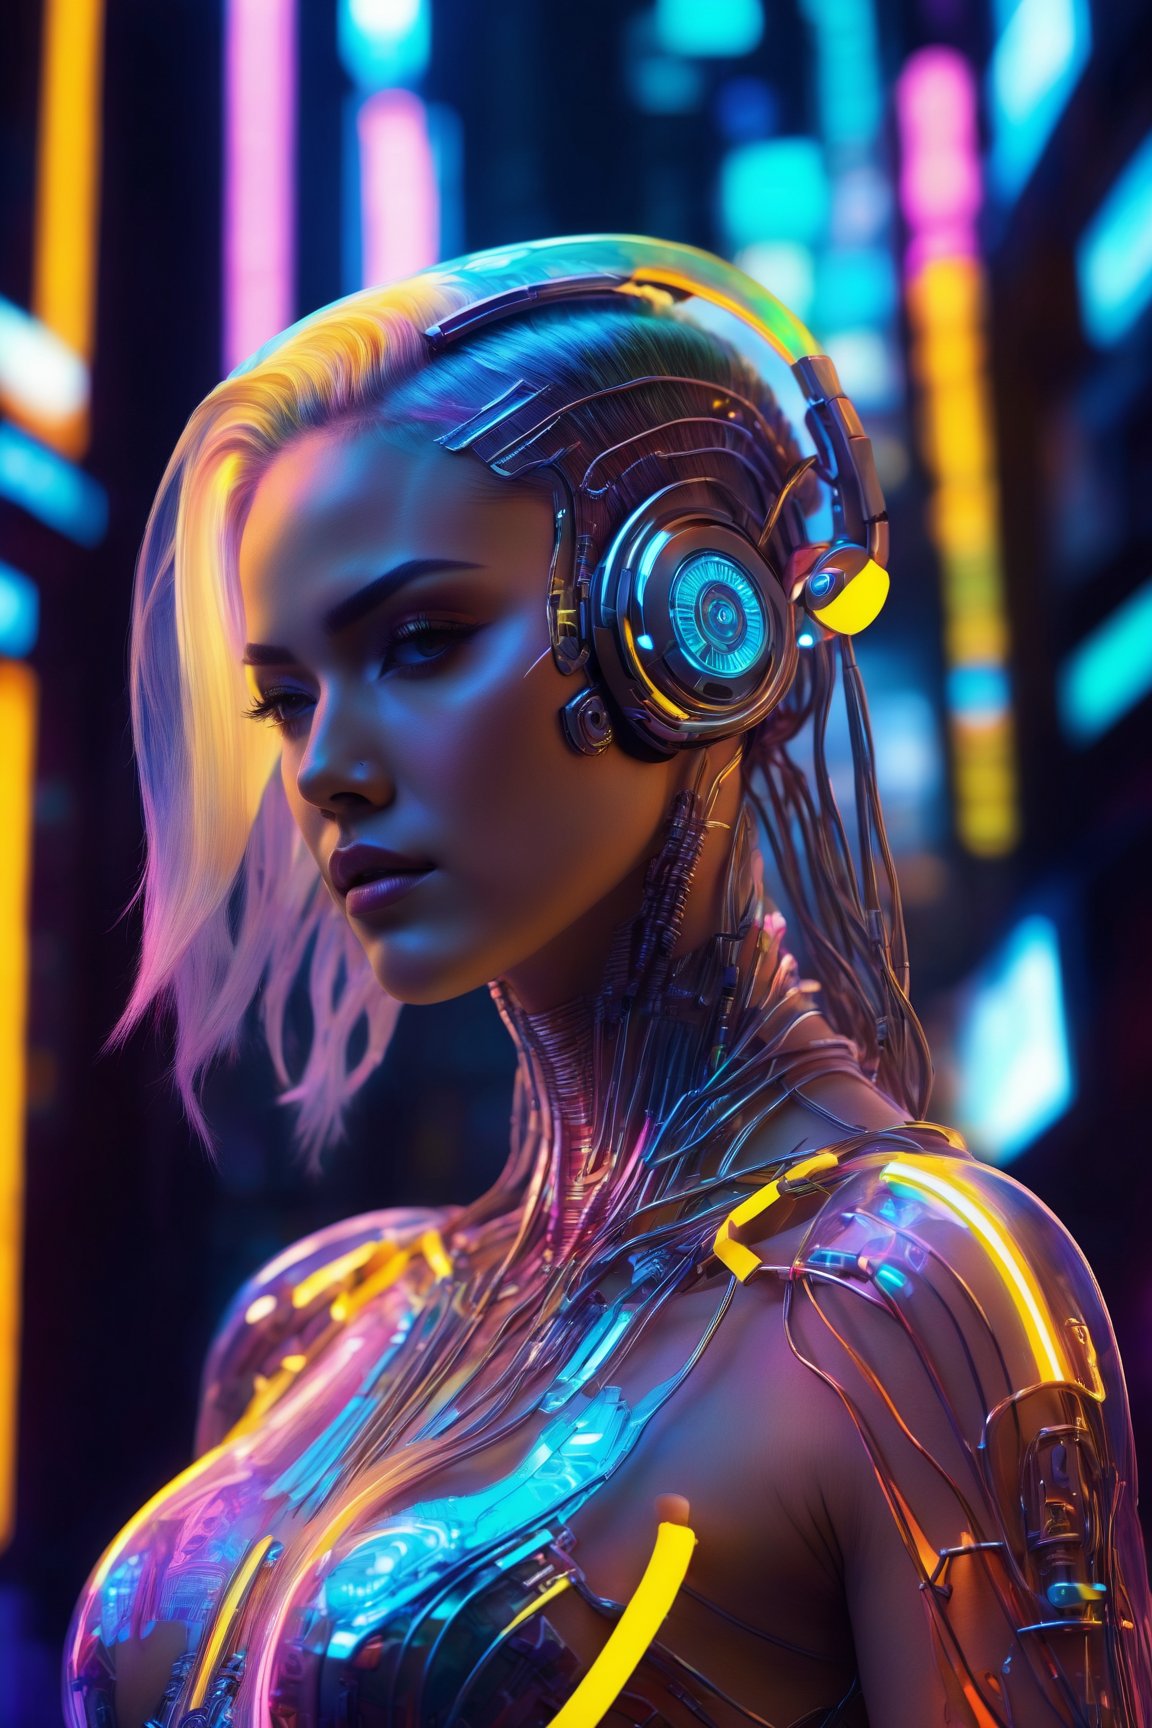 (best quality, 4k, 8k, highres, masterpiece:1.2), ultra-detailed, (realistic, photorealistic, photo-realistic:1.37), cyborg woman, transparent rib cage made of glass, neon cables, gears inside the glass body, glowing circuits, futuristic mechanical parts, cybernetic enhancements, metallic skin, stunning silver hair flow, piercing eyes, high-tech headset, sleek and angular body, dynamic pose, urban background, neon-lit cityscape, vibrant colors, holographic projections, dramatic lighting